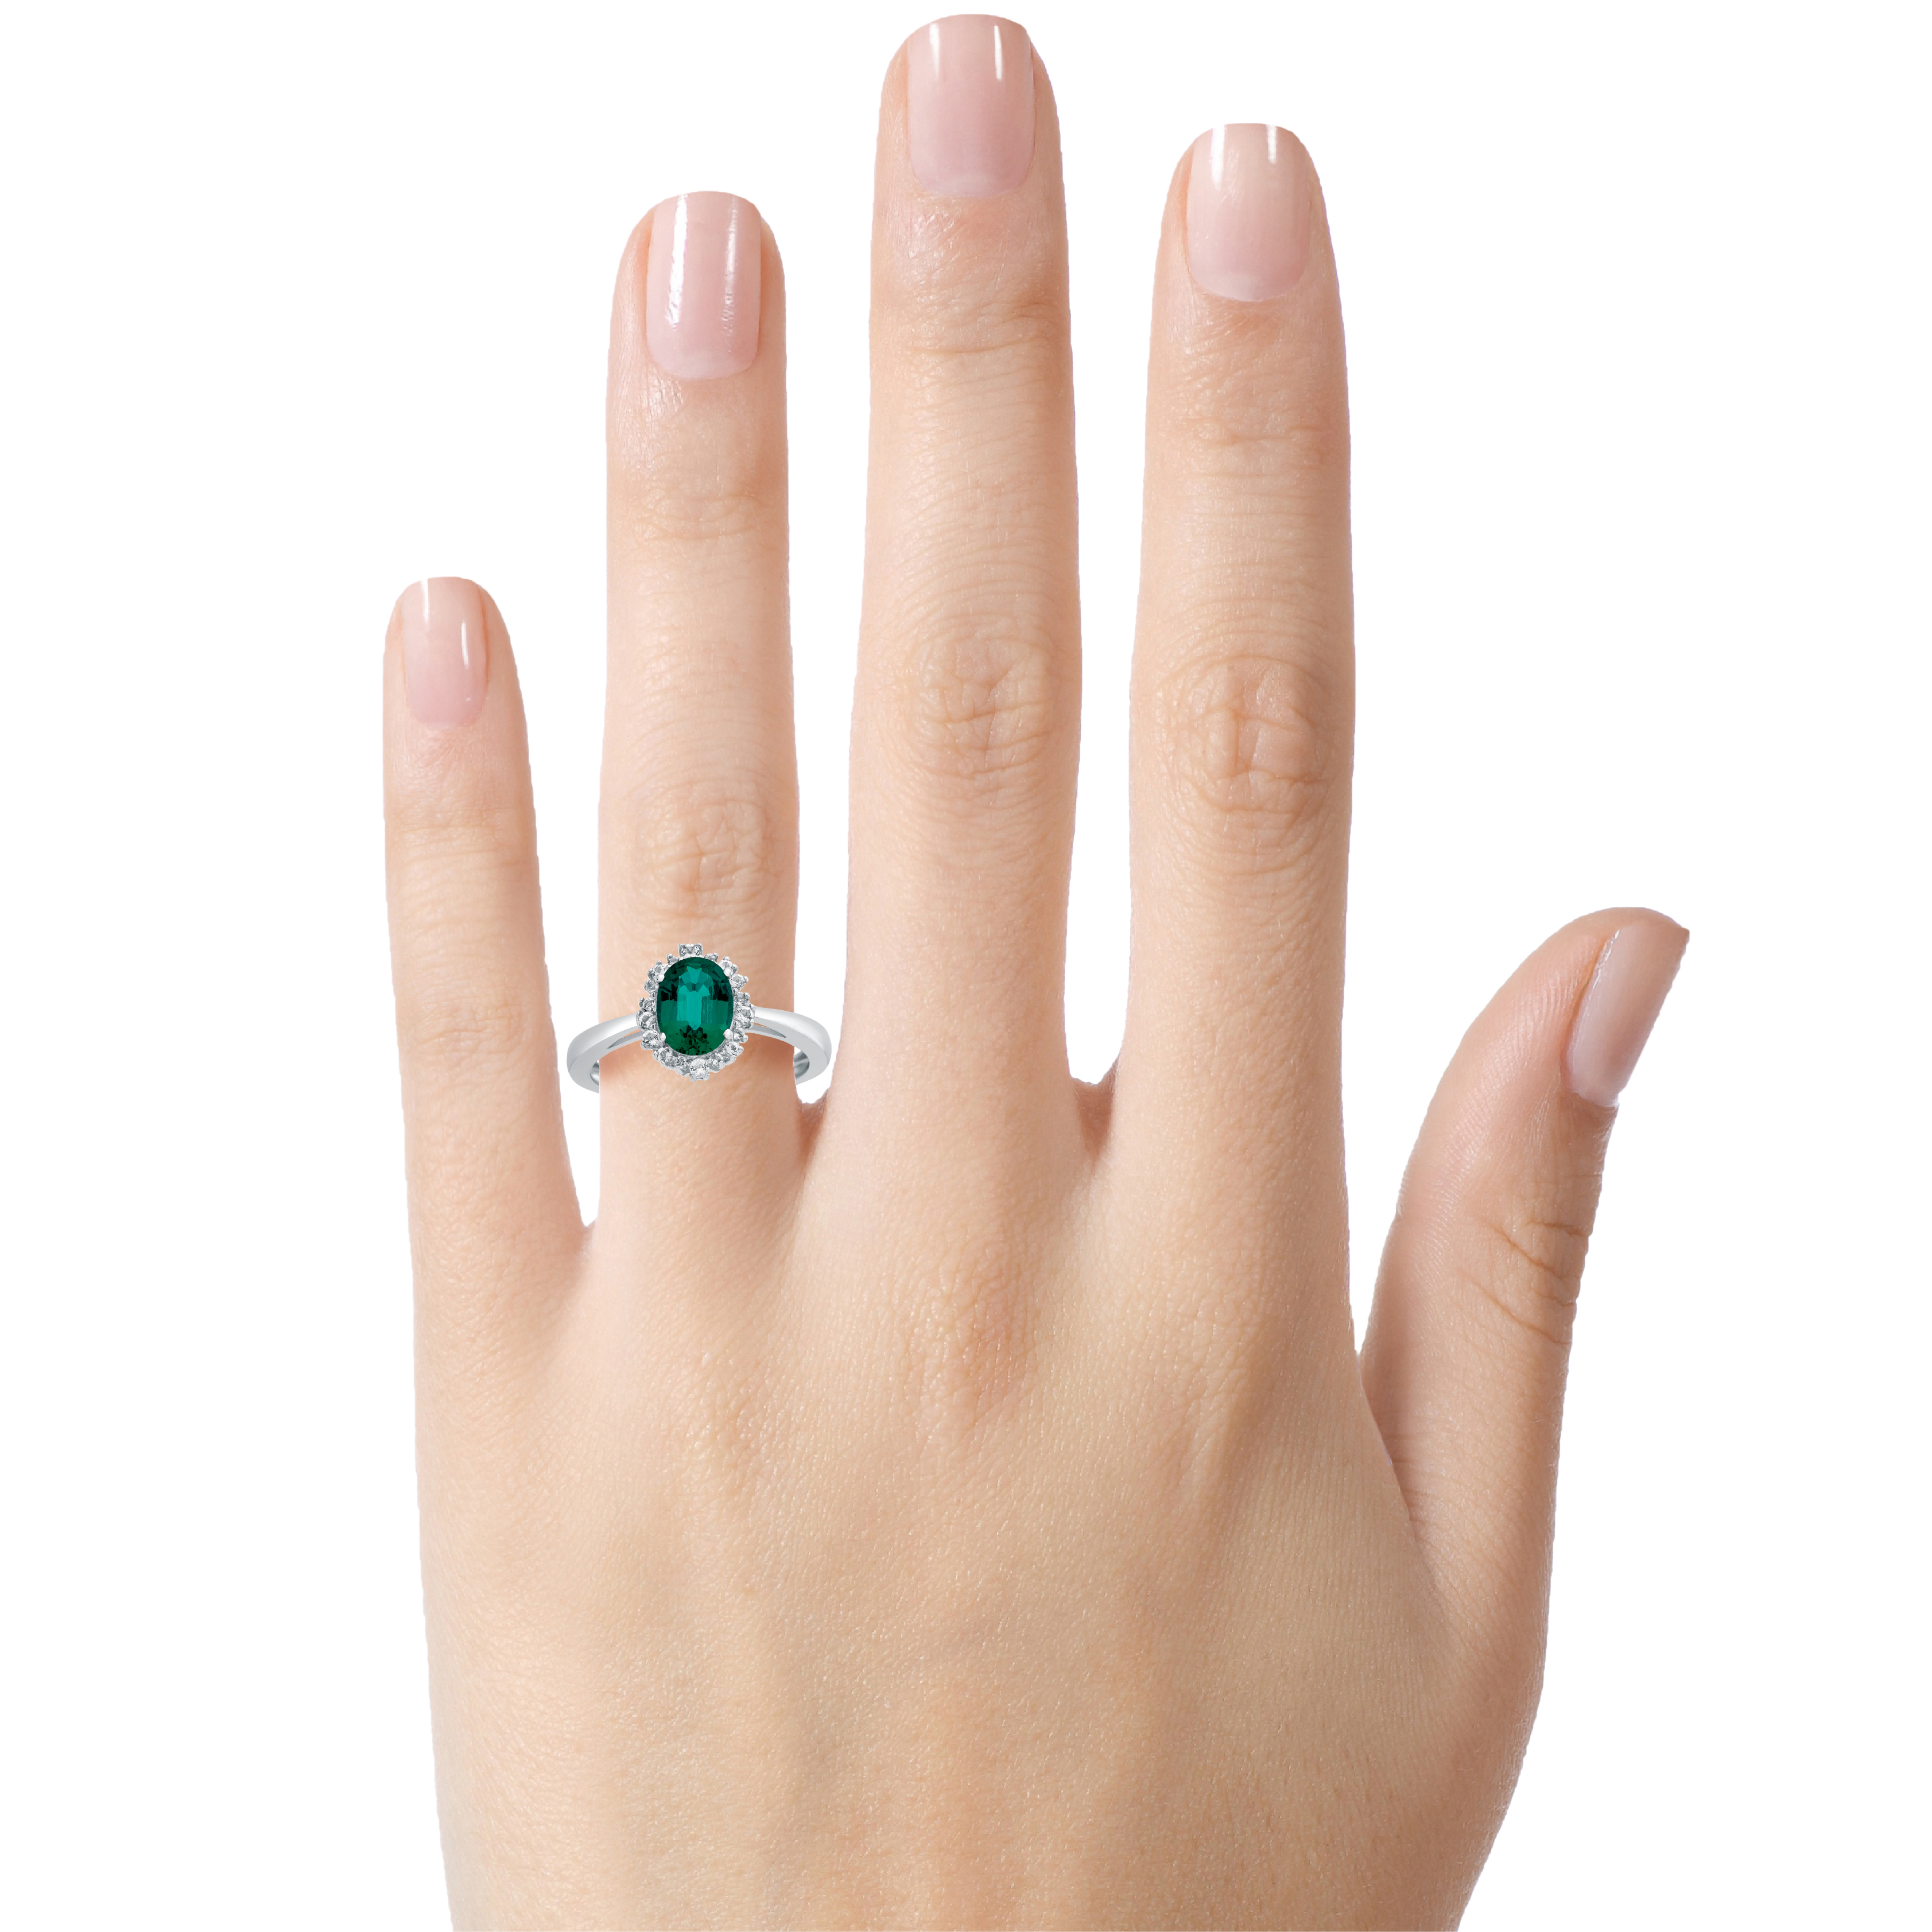 FJC Finejewelers 10k White Gold 8x6mm Oval Created Emerald with White Topaz accent stones Halo Ring